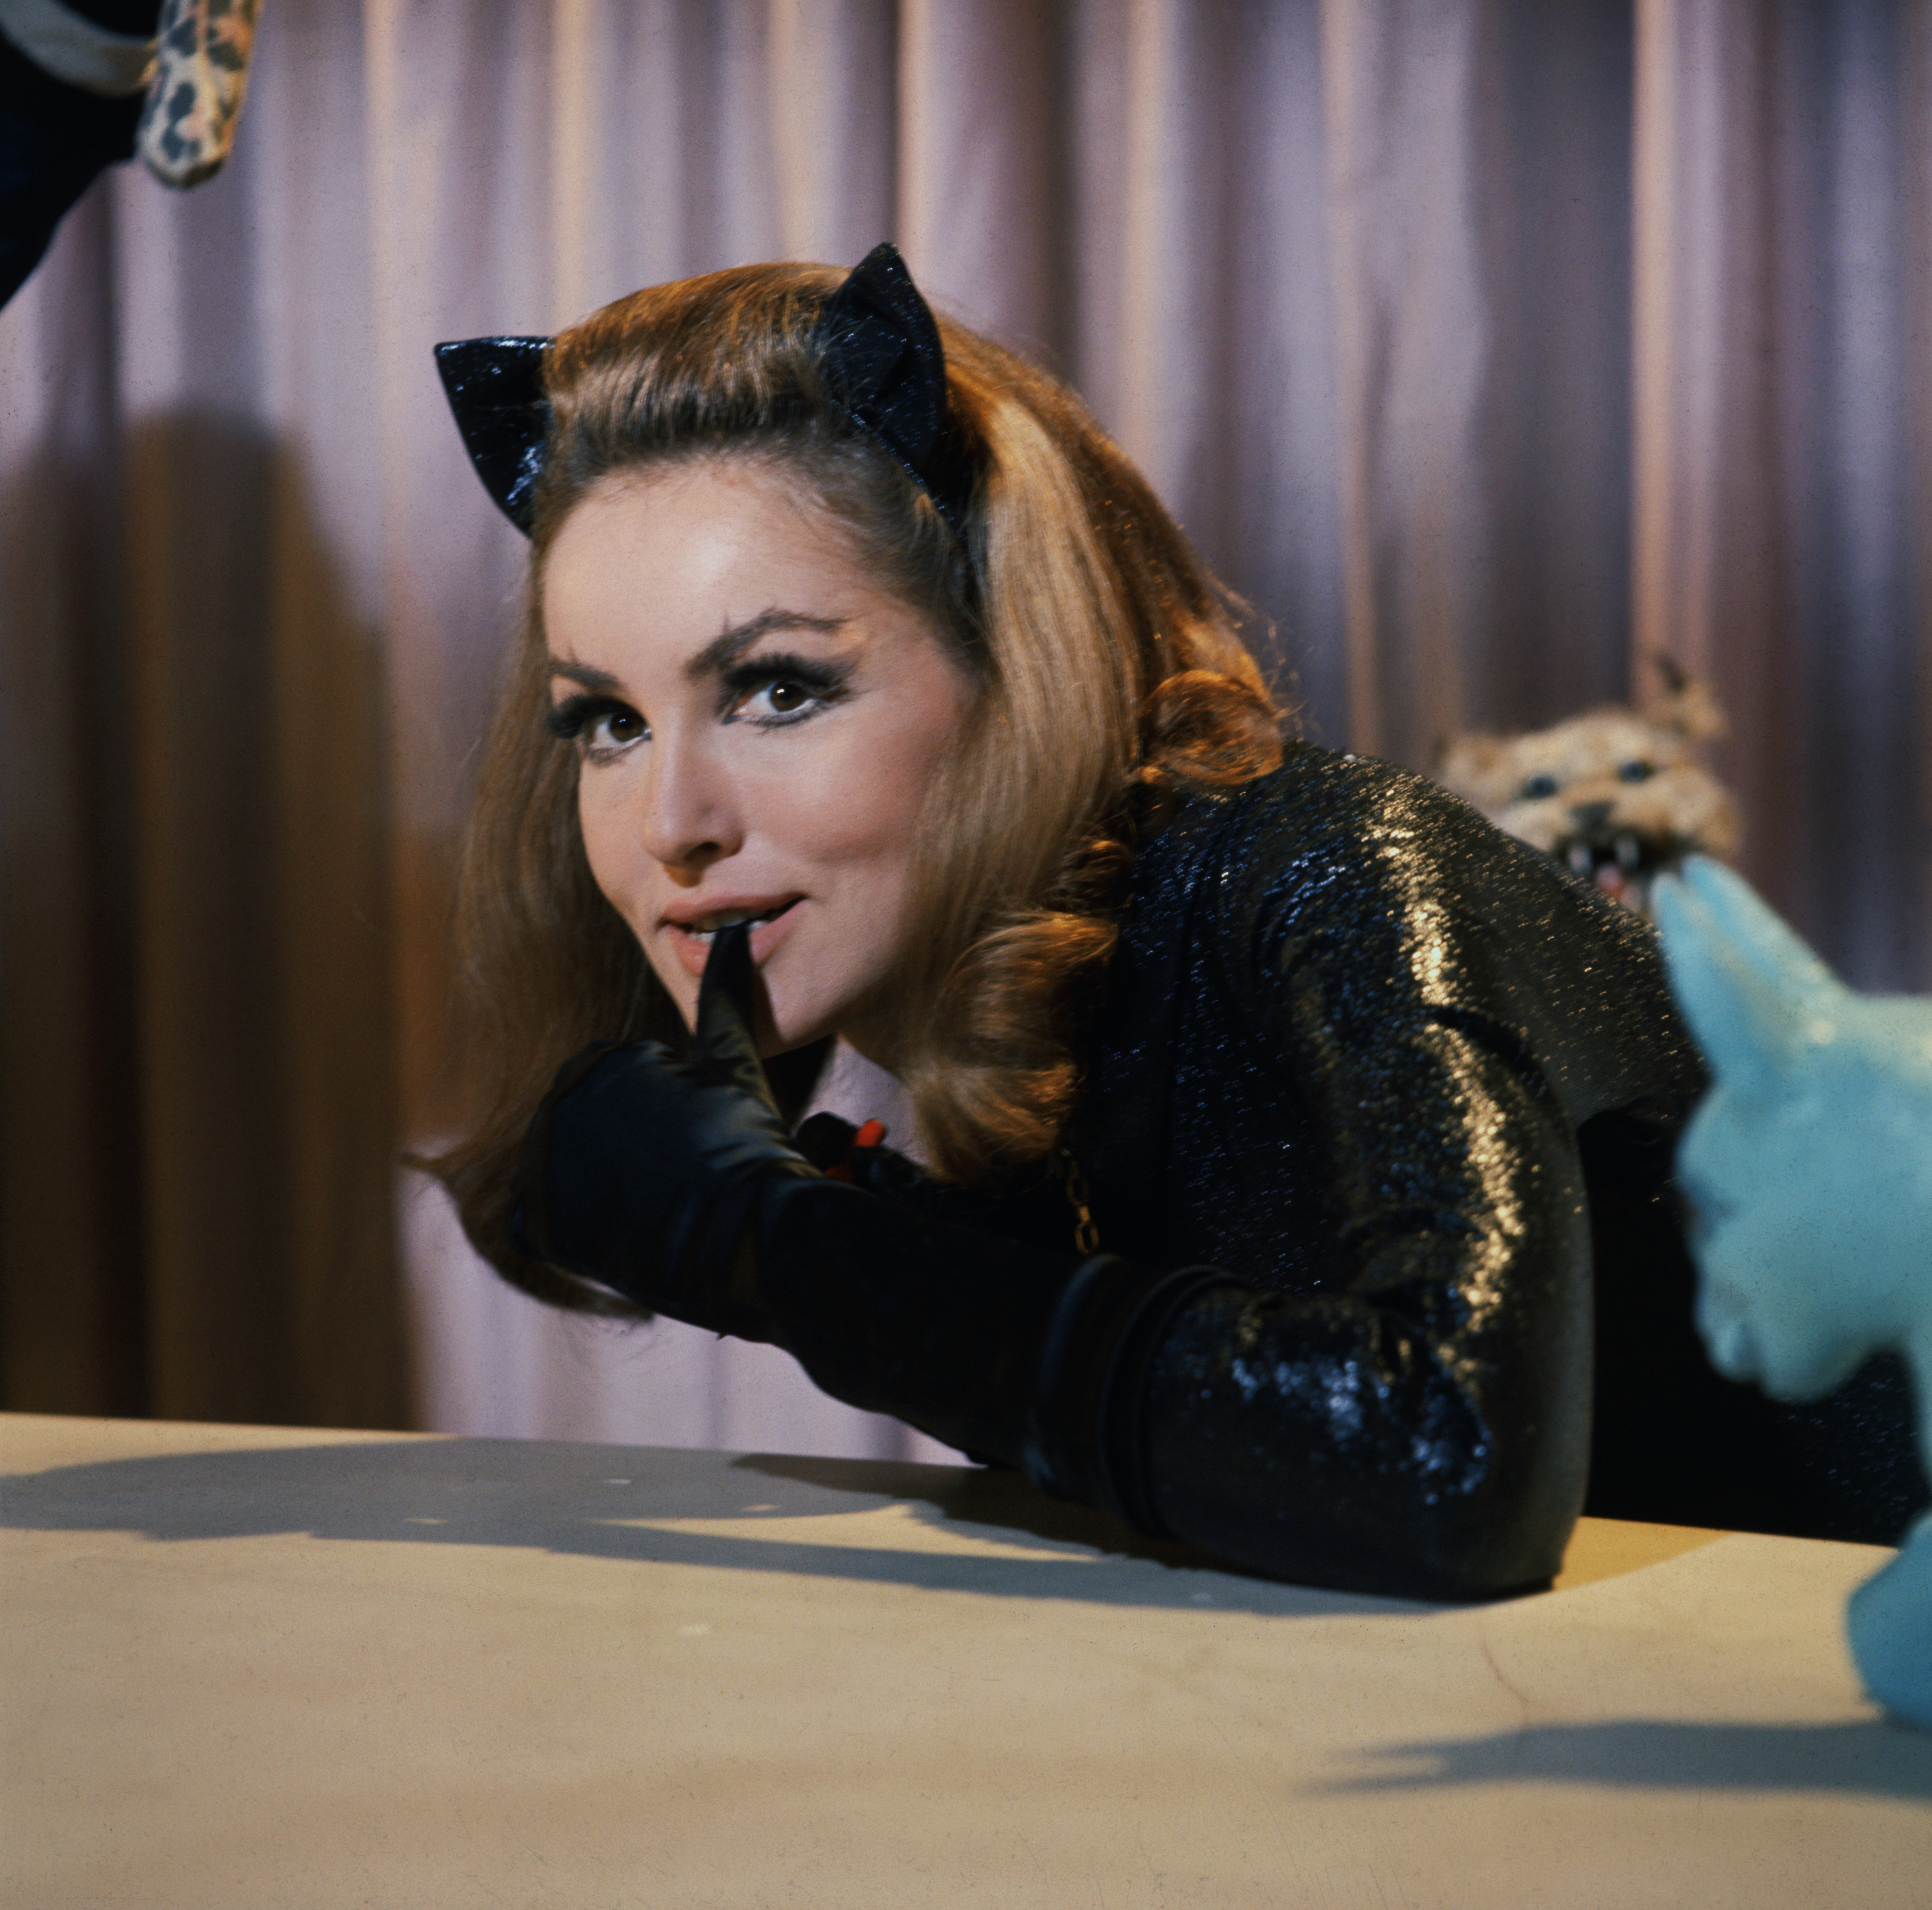 Julie Newmar poses as Catwoman from the1966-1968 "Batman" series | Source: Getty Images